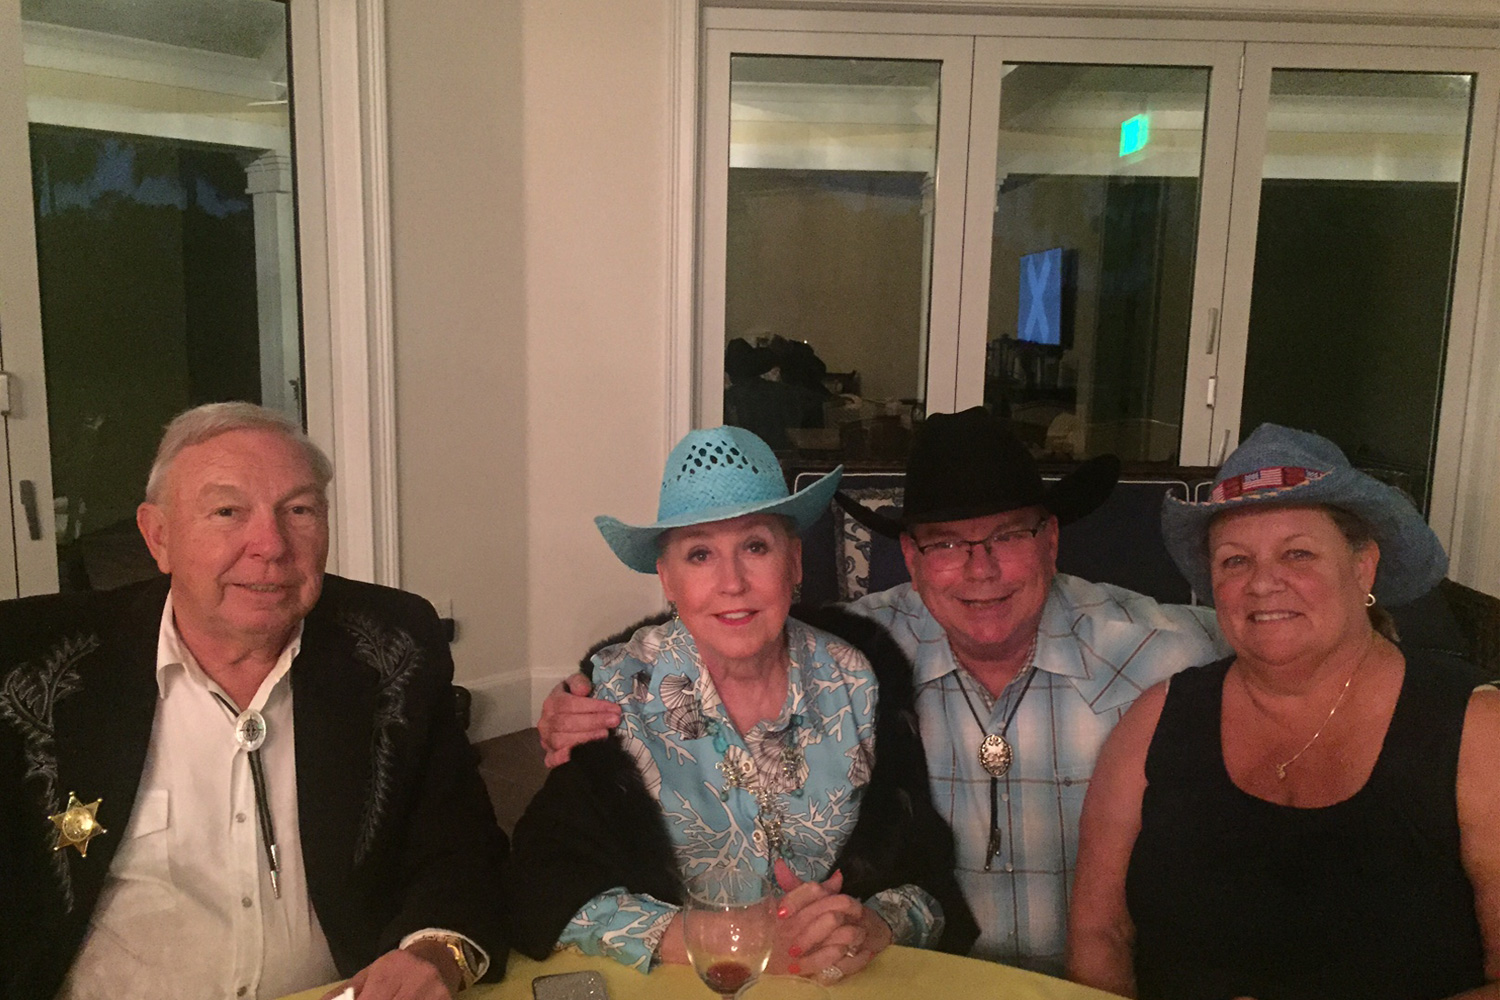 2017 Dinner and Dancing at The Racqeut Club